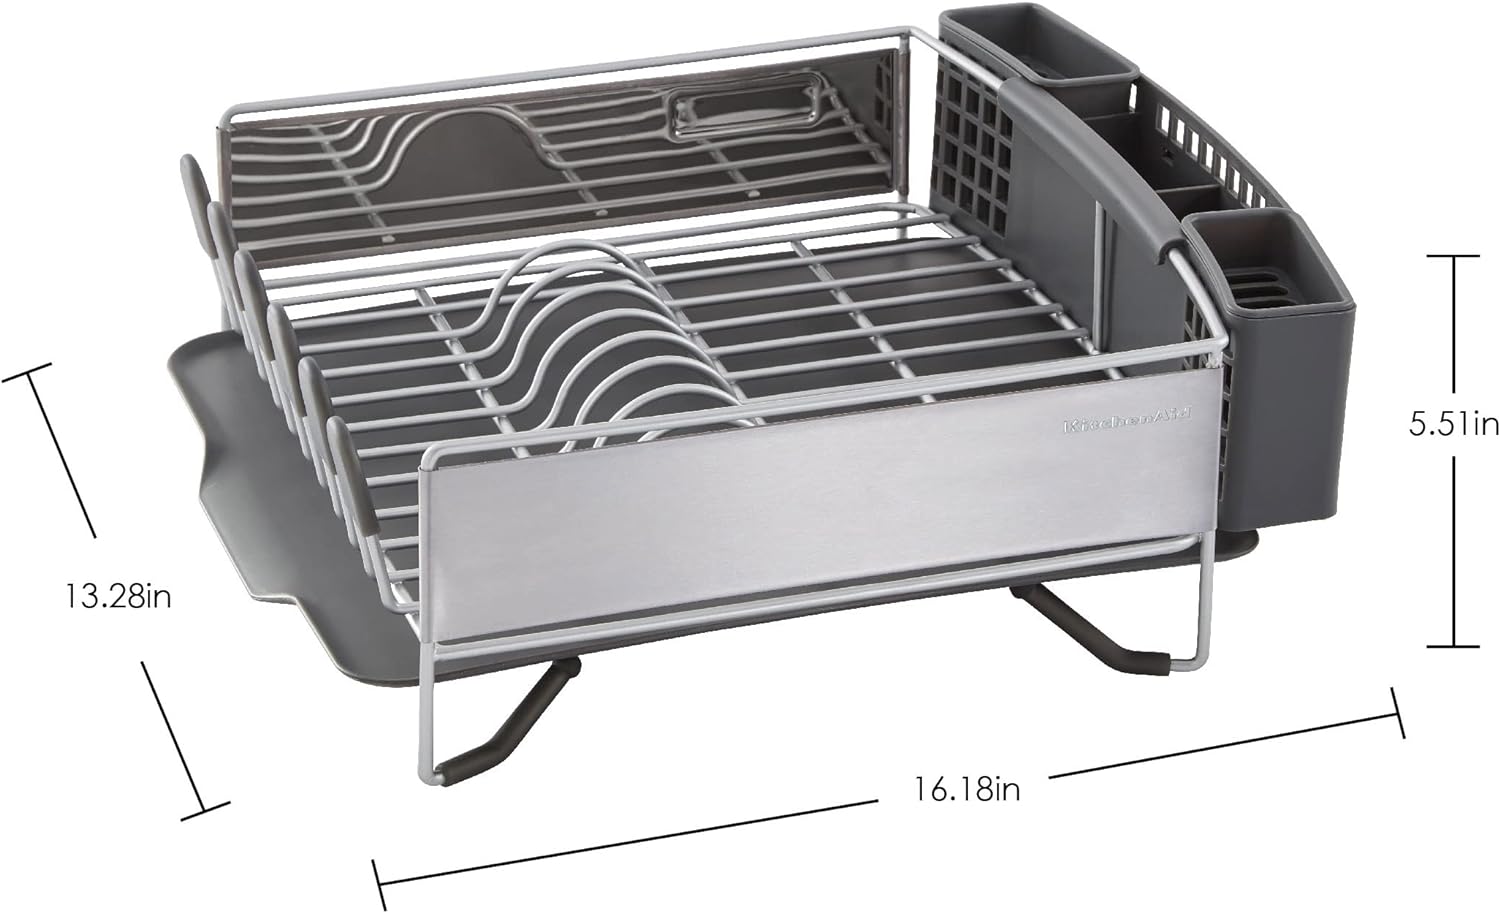 KitchenAid Compact Stainless Steel Dish Drying Rack